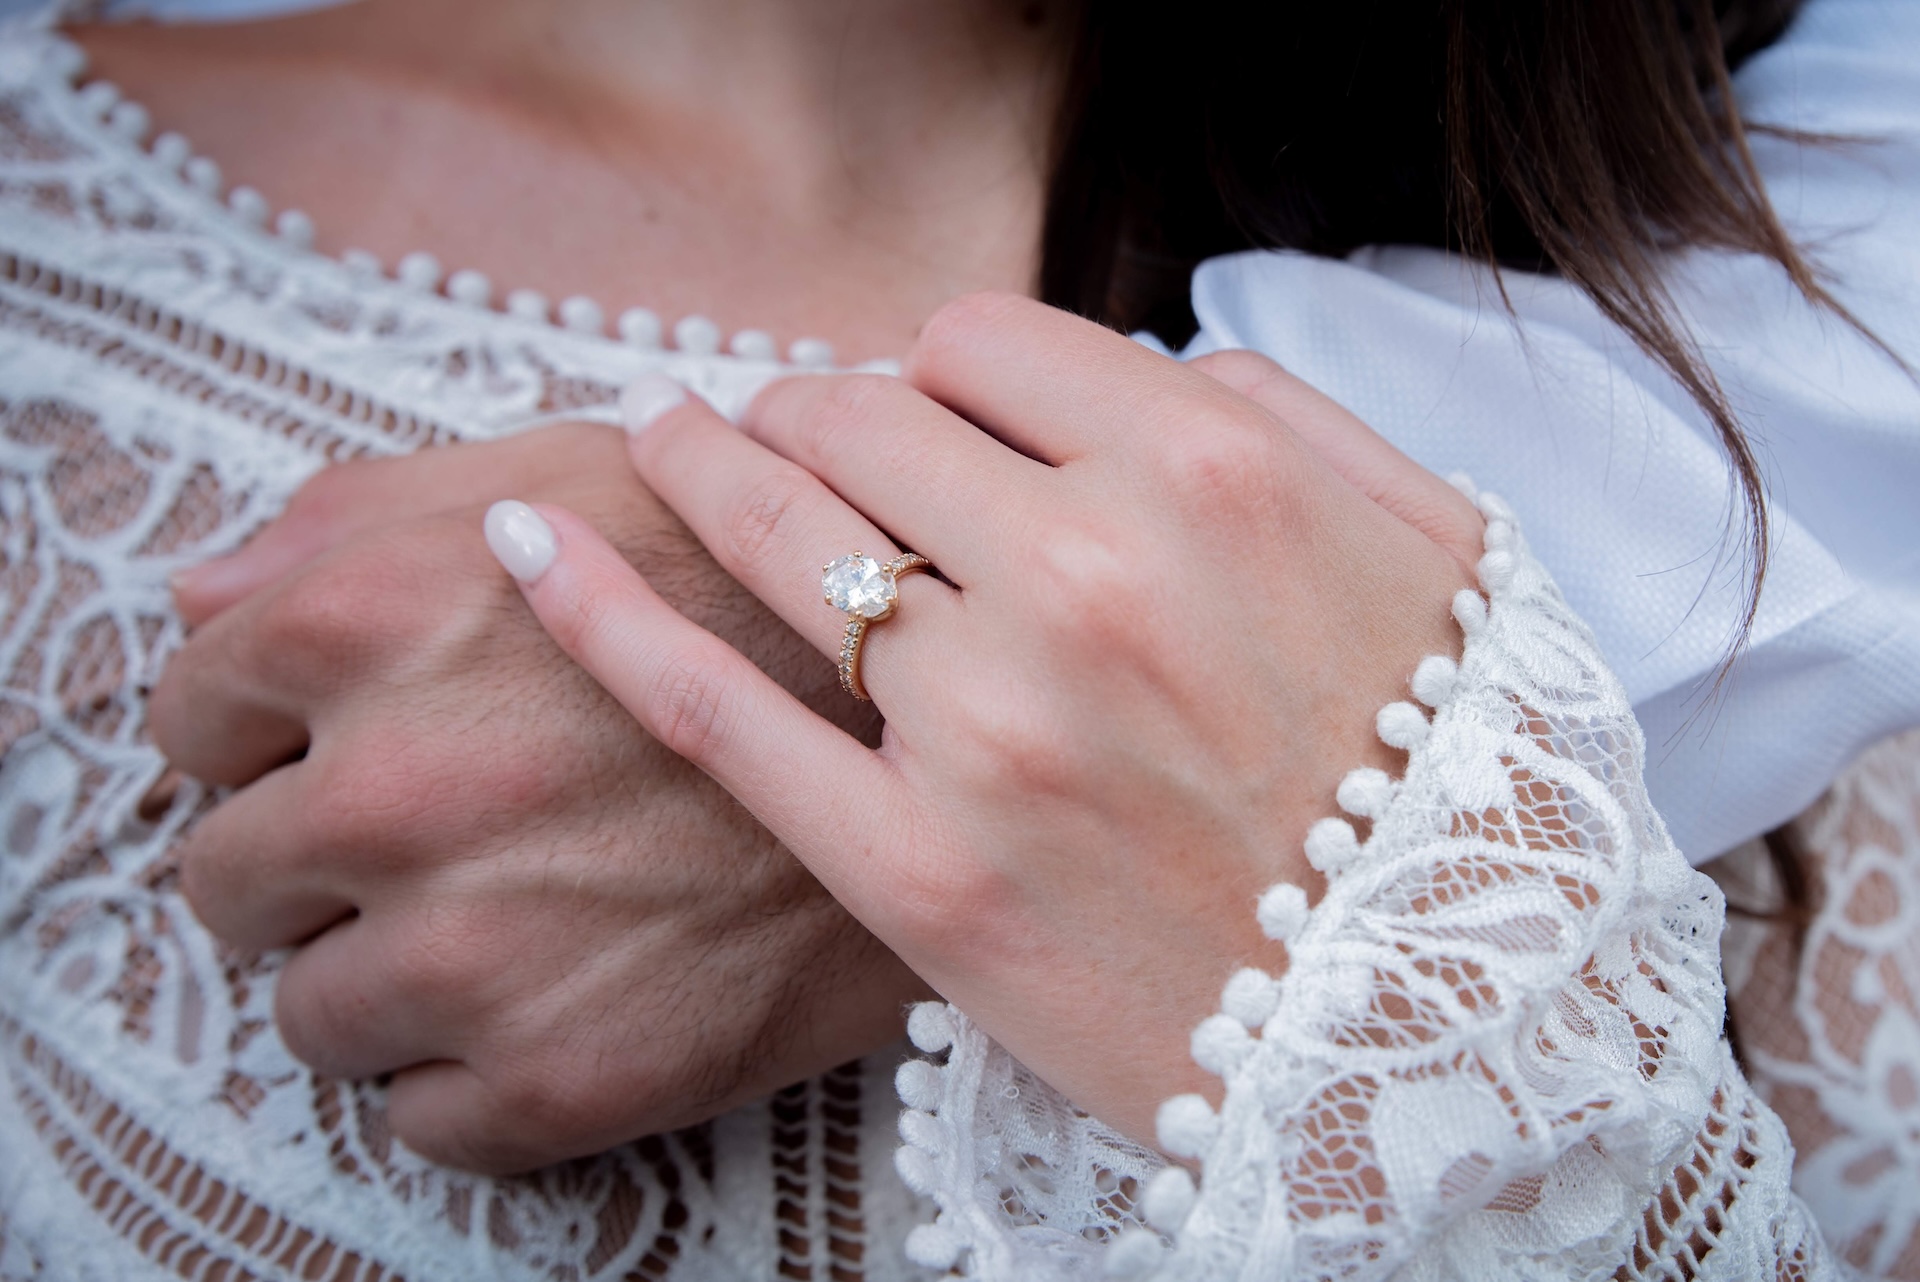 Close up of female hand with engagement ring holding male hand across her chest